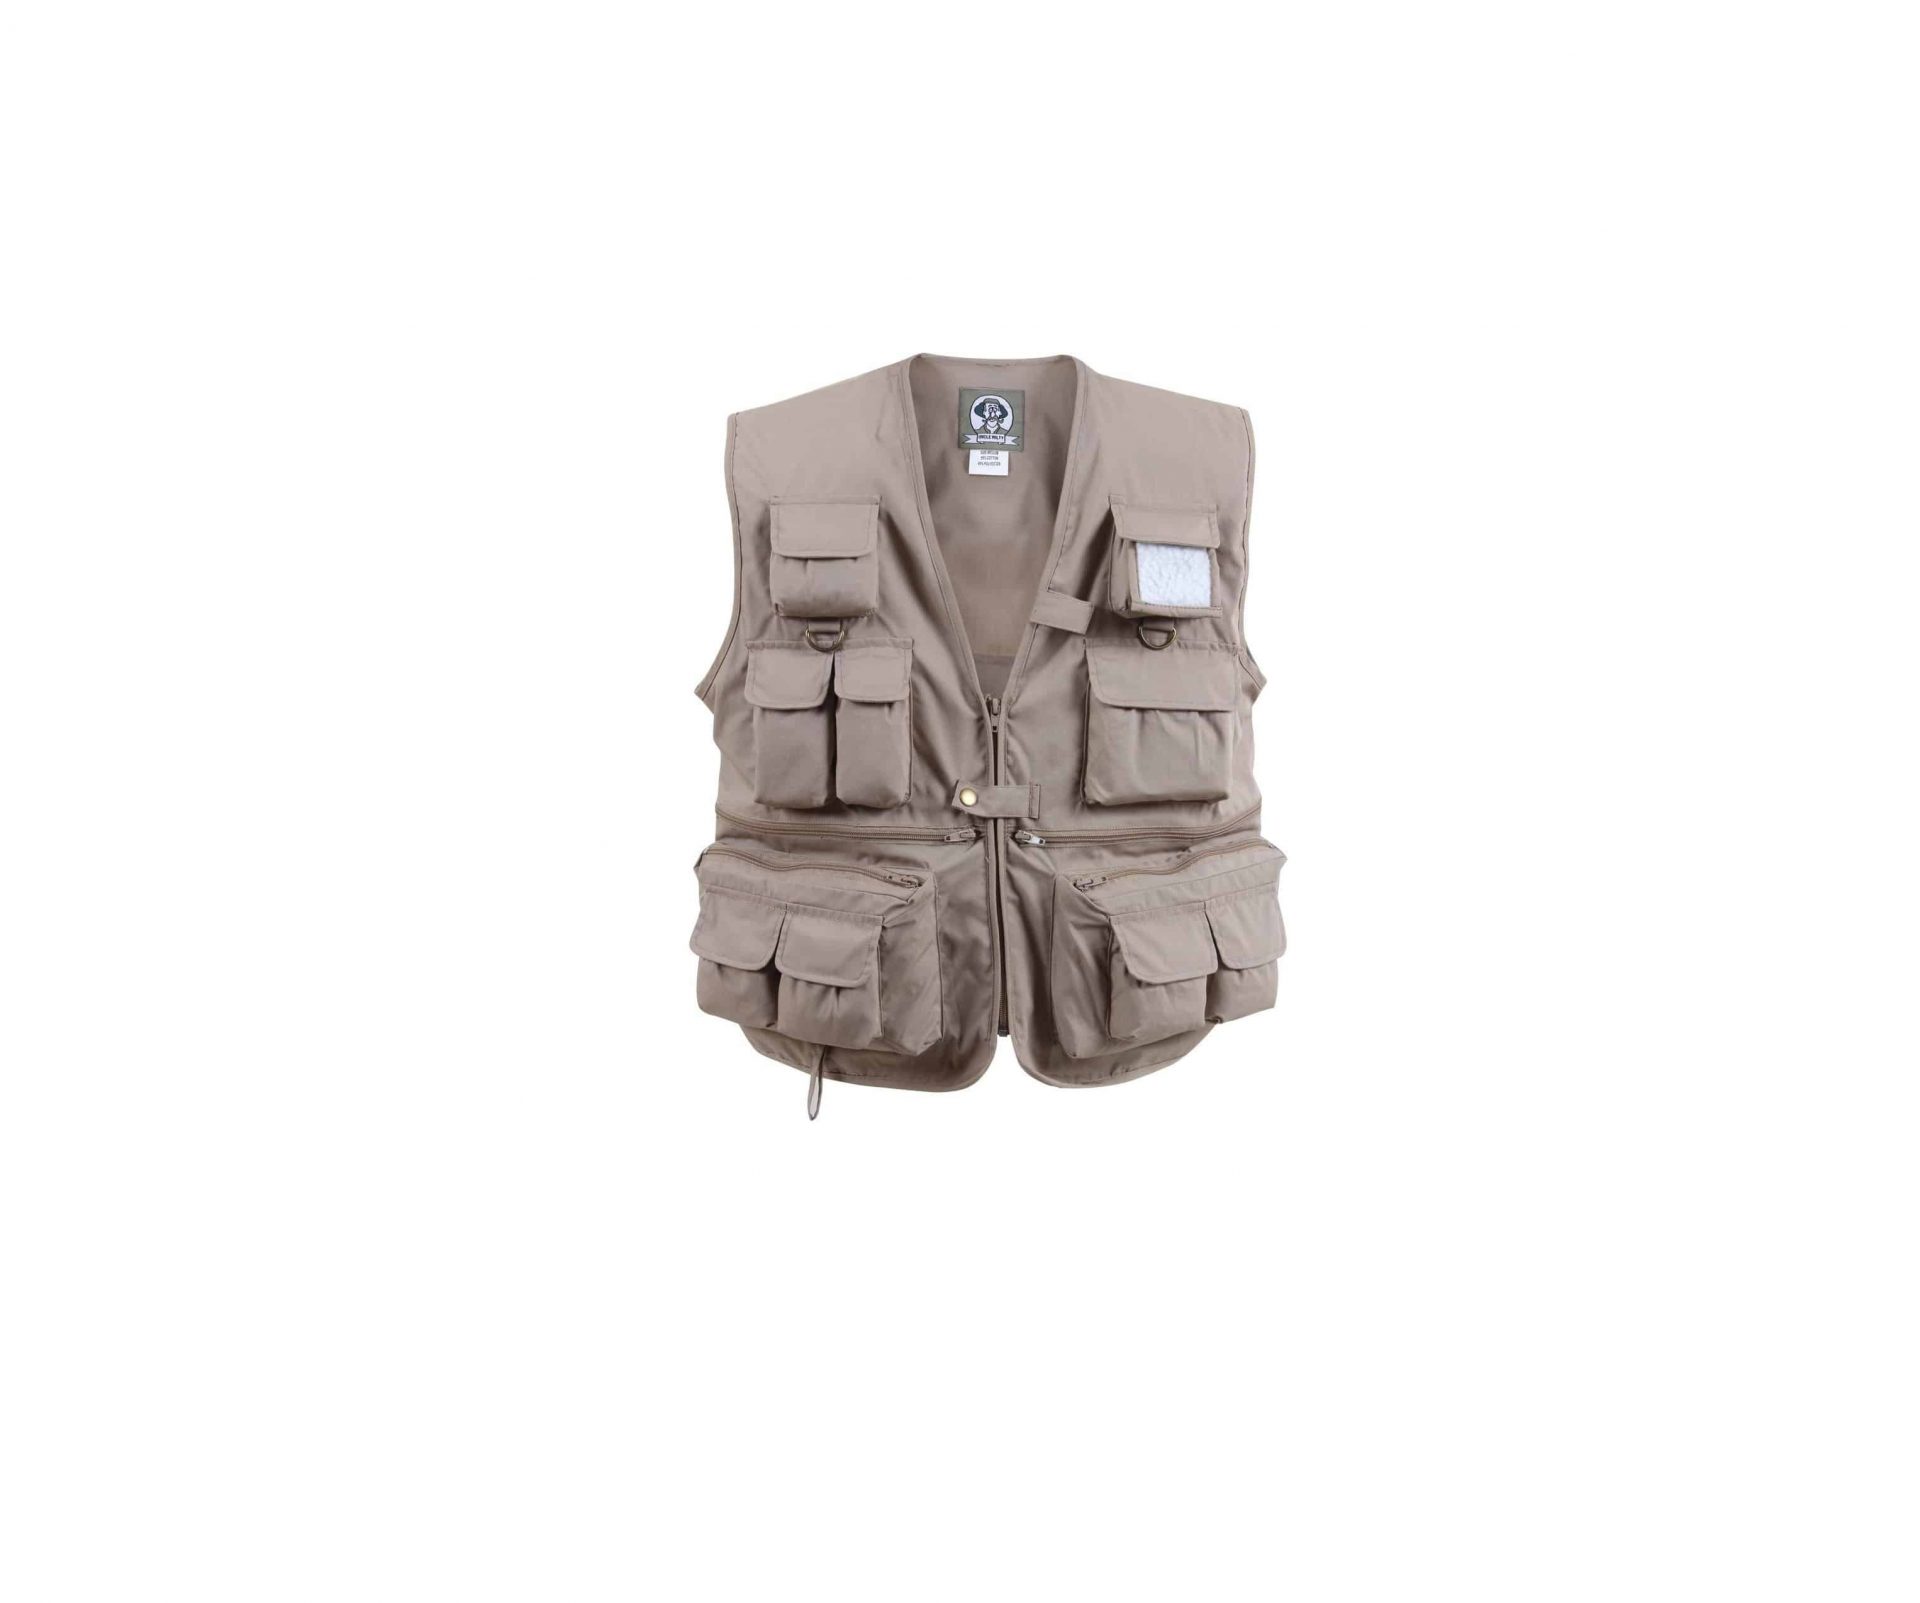 Top 10 Best Fishing Vests in 2021 Reviews | Buying Guide